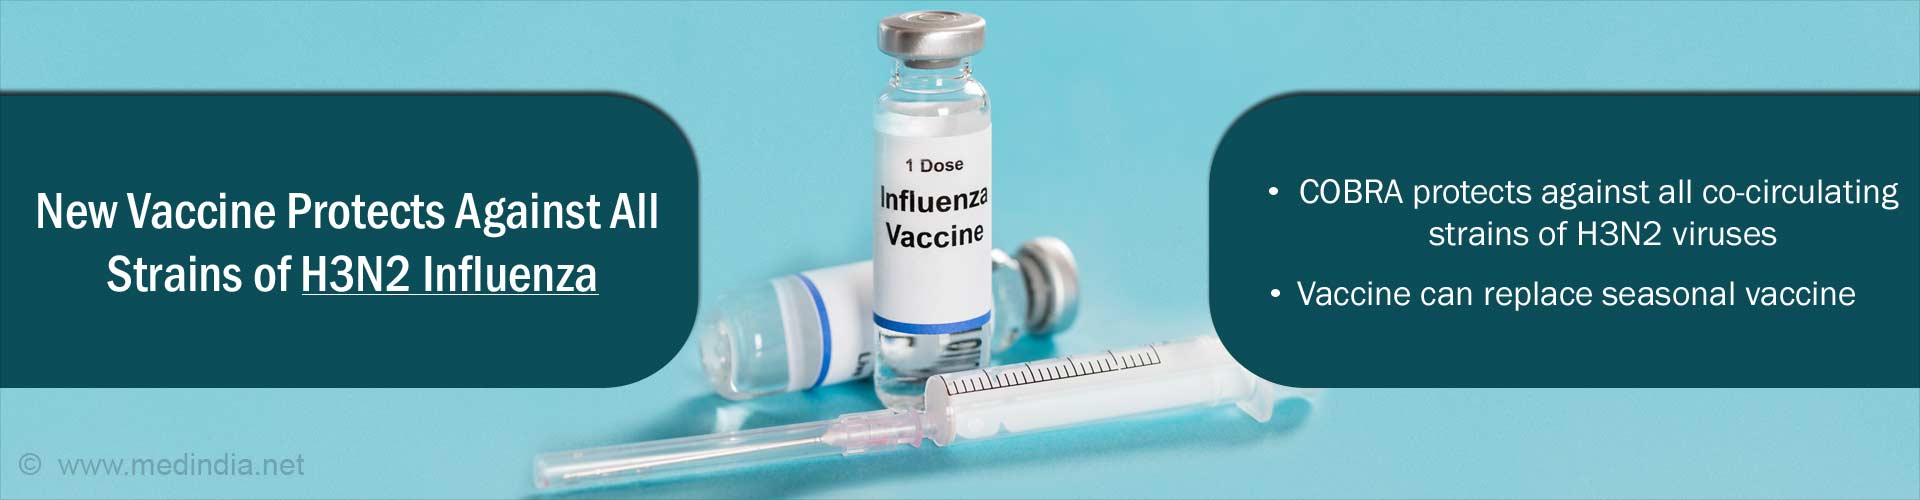 new vaccine protects against all strains of H3N2 influenza
- COBRA protects against all co-circulating strains of  H3N2
- vaccine can replace seasonal vaccine